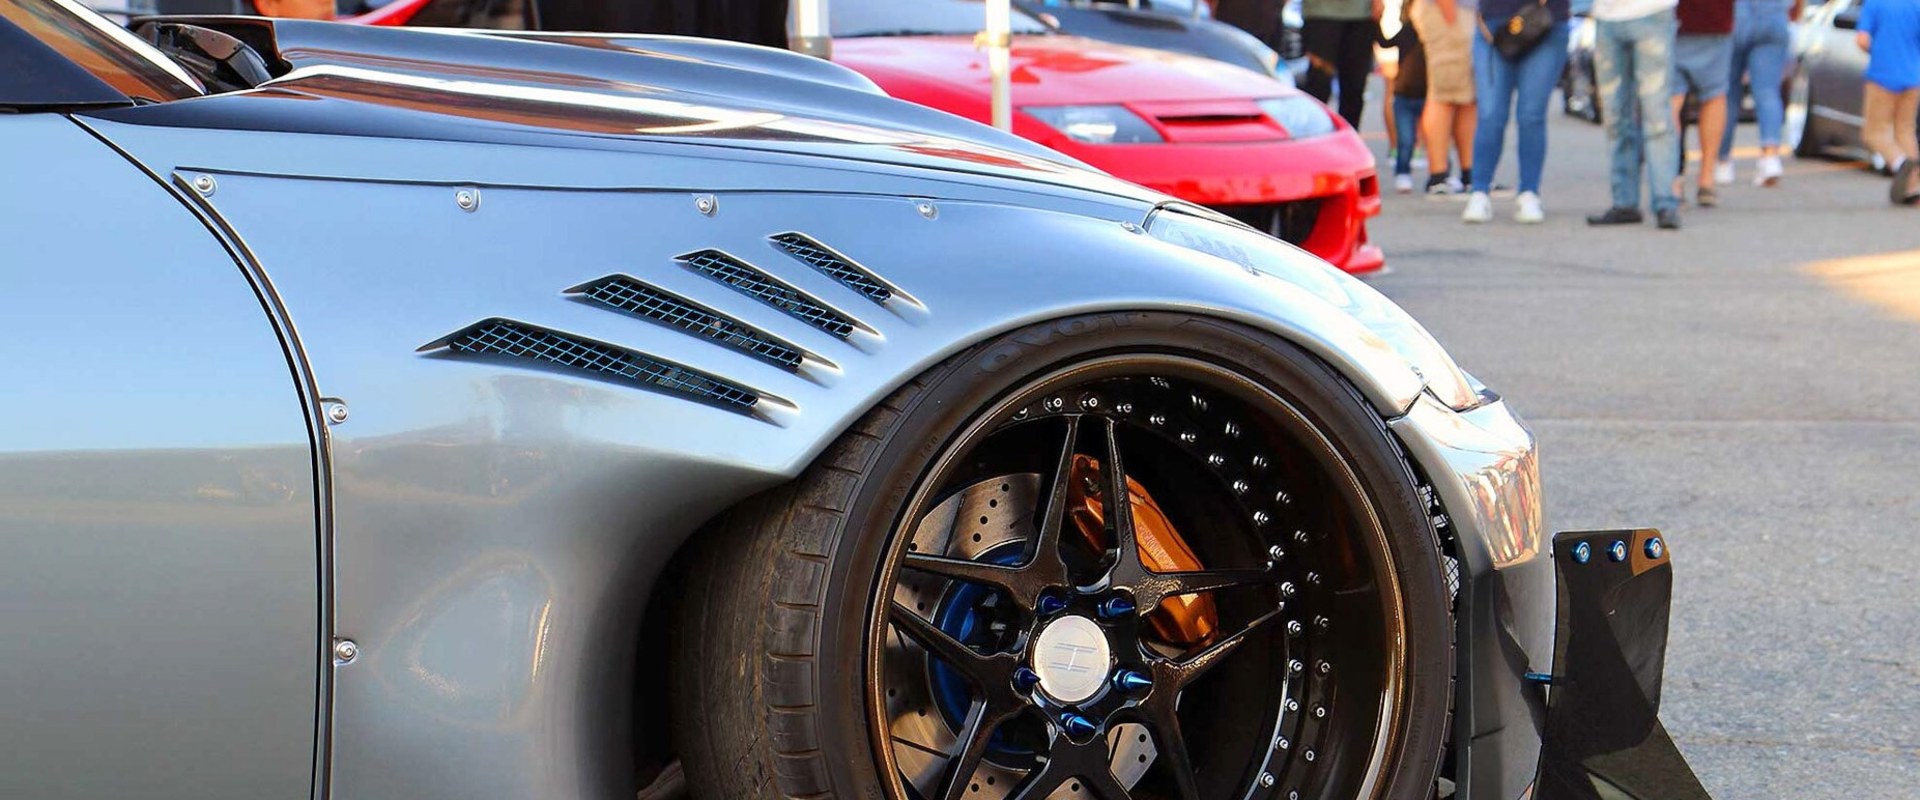 Everything You Need to Know About Wheels, Tires, Rims, and Suspension Parts